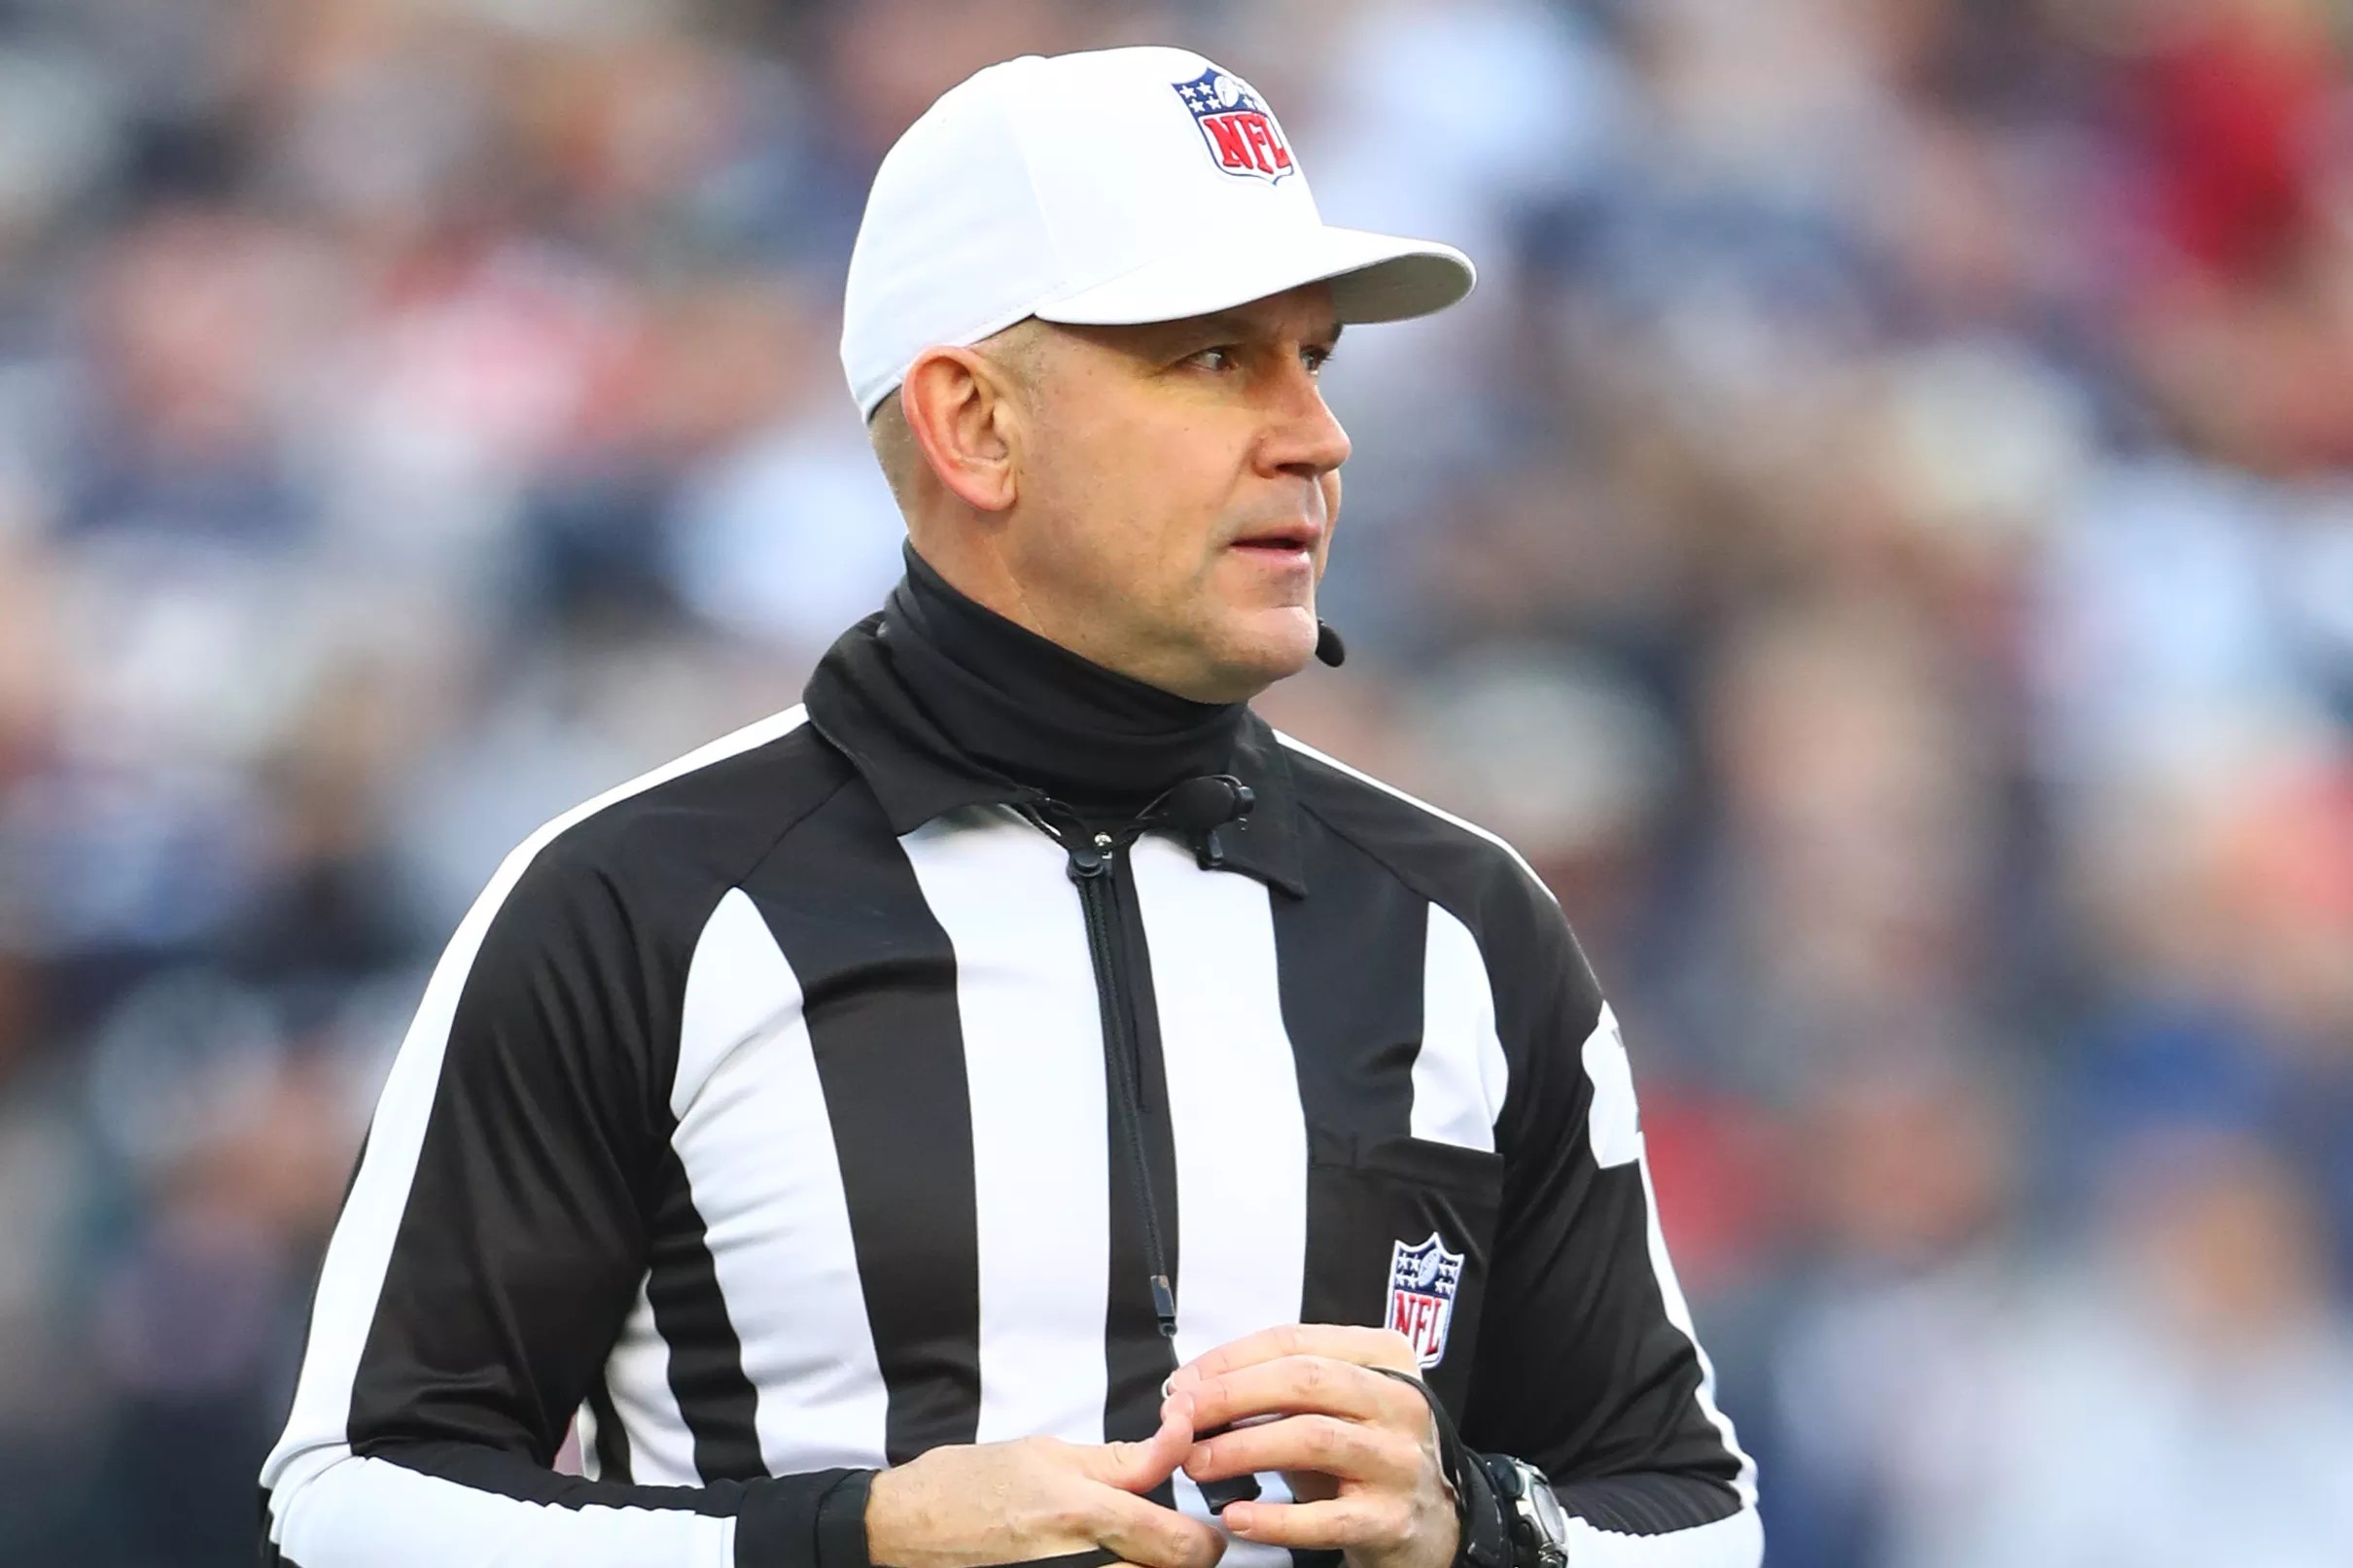 2019 AFC Championship Game Clete Blakeman will be the referee for